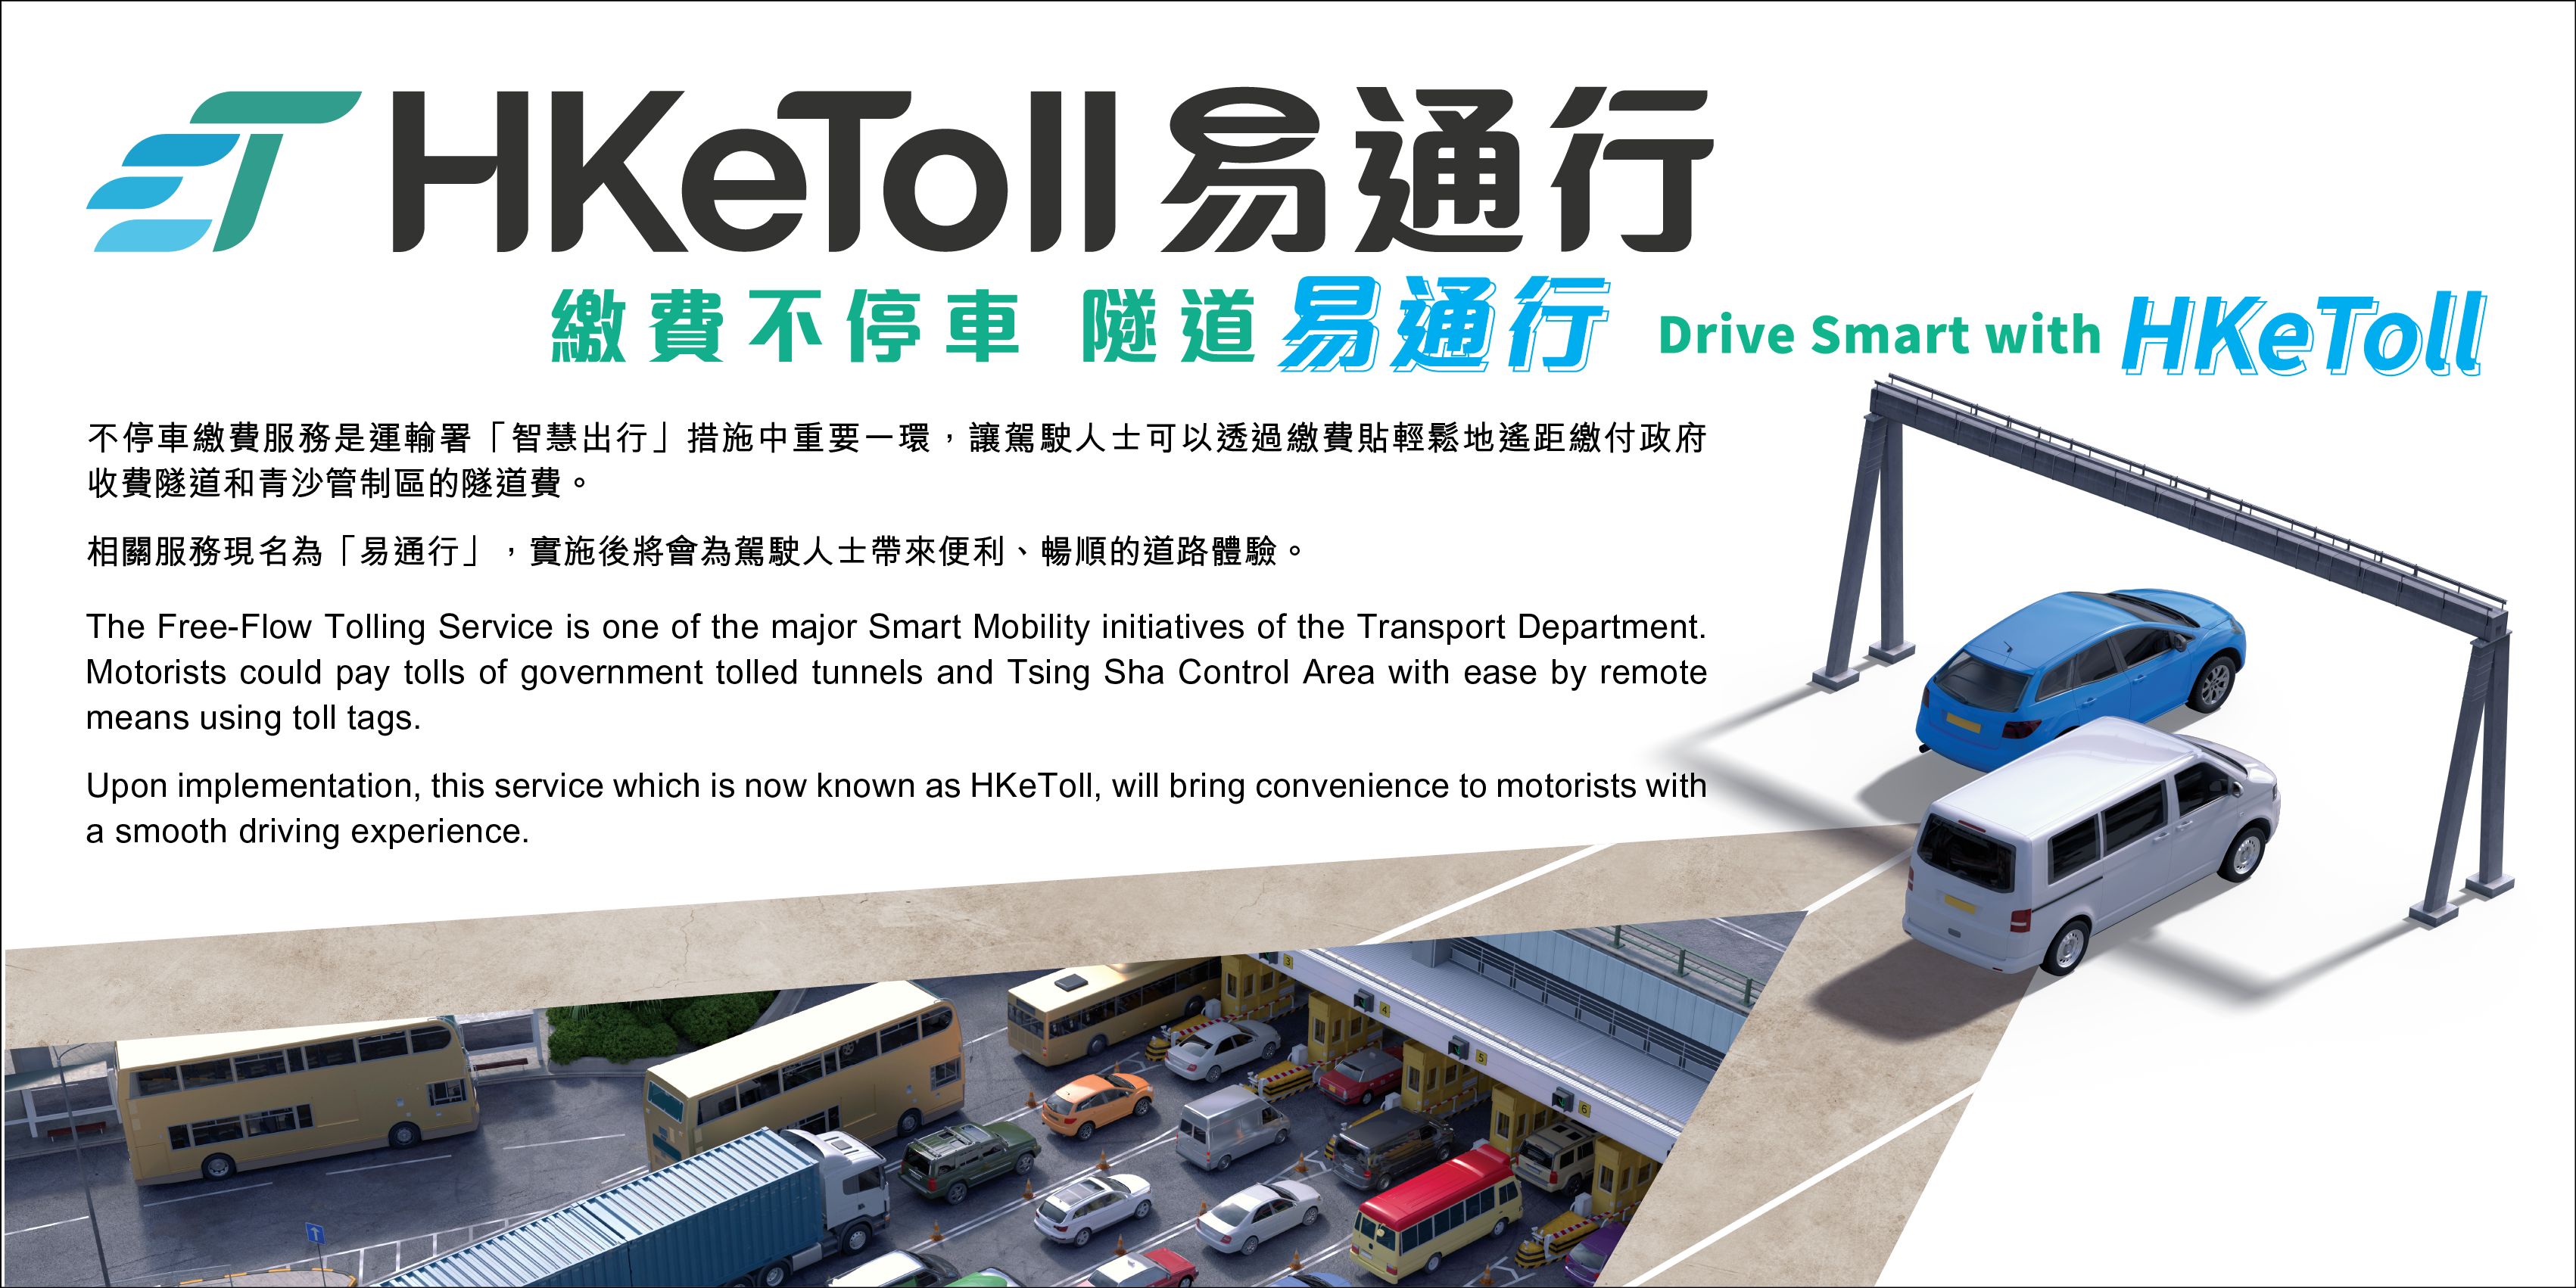 The Free-Flow Tolling Service is one of the major Smart Mobility initiatives of the Transport Department. Motorists could pay tolls of government tolled tunnels and Tsing Sha Control Area with ease by remote means using toll tags. Upon implementation, this service which is now known as HKeToll, will bring convenience to motorists with a smooth driving experience.